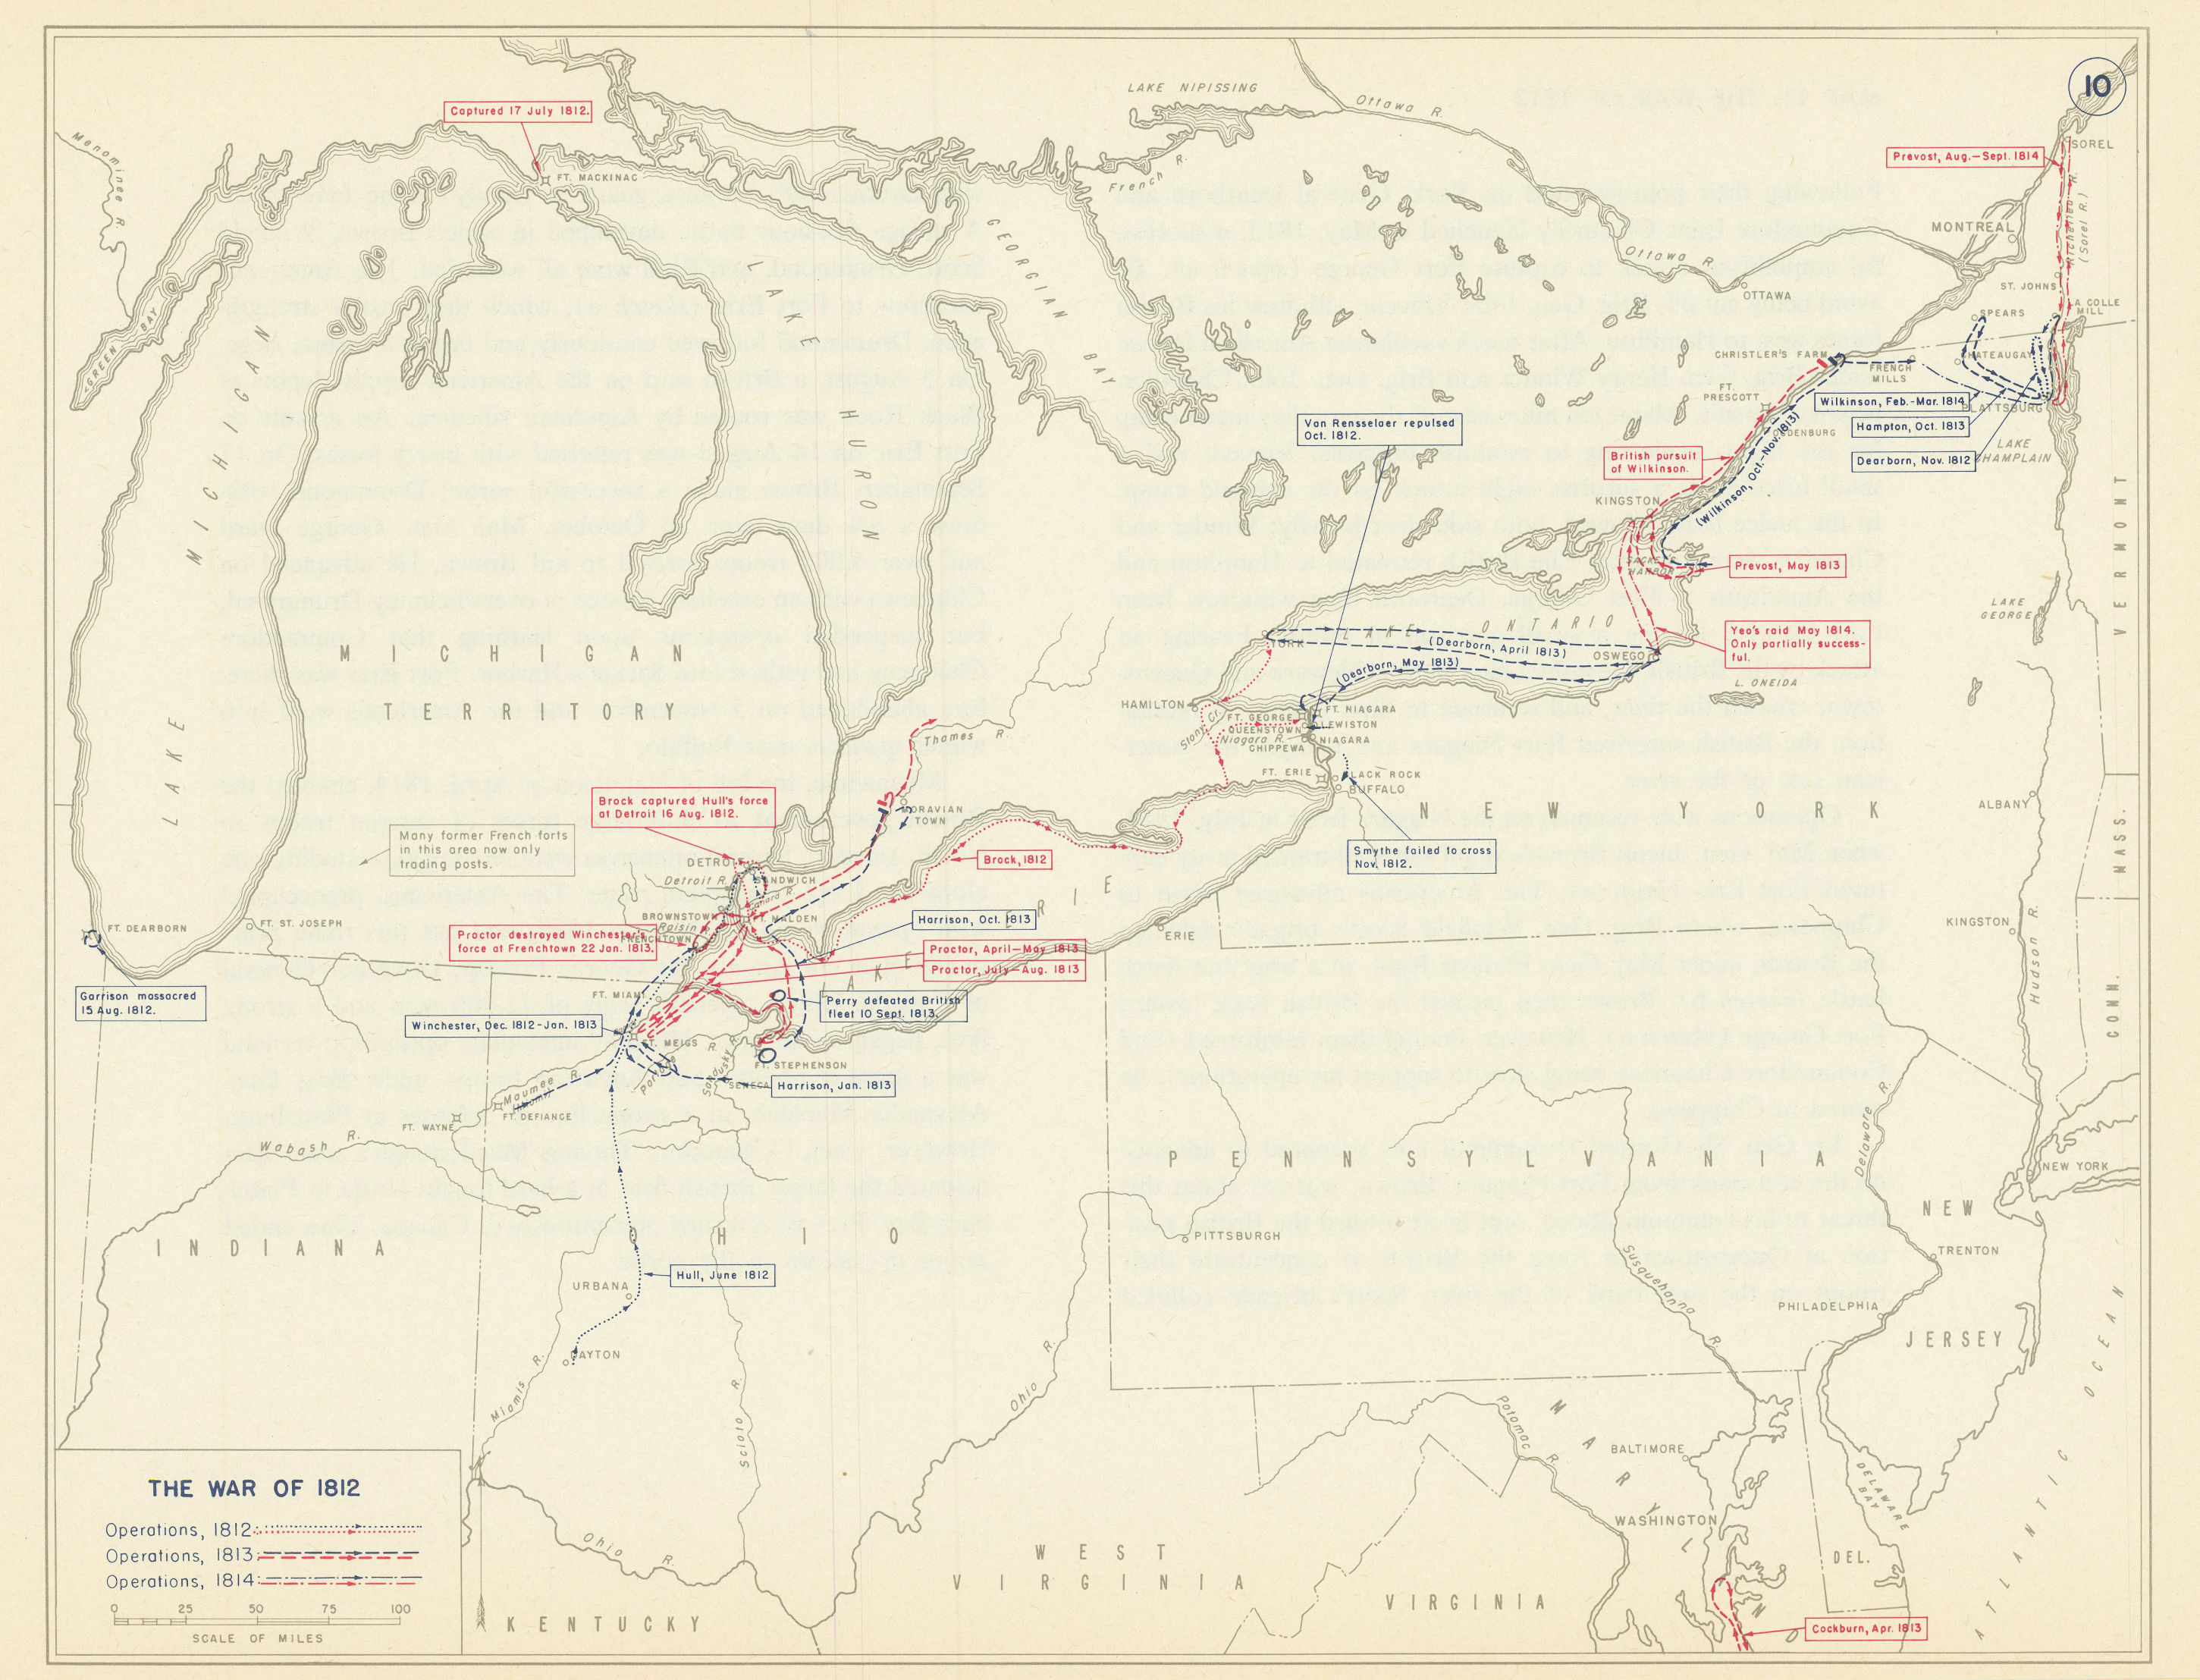 War of 1812. Operations in 1812-1814 in Canada New York Ohio Michigan 1959 map